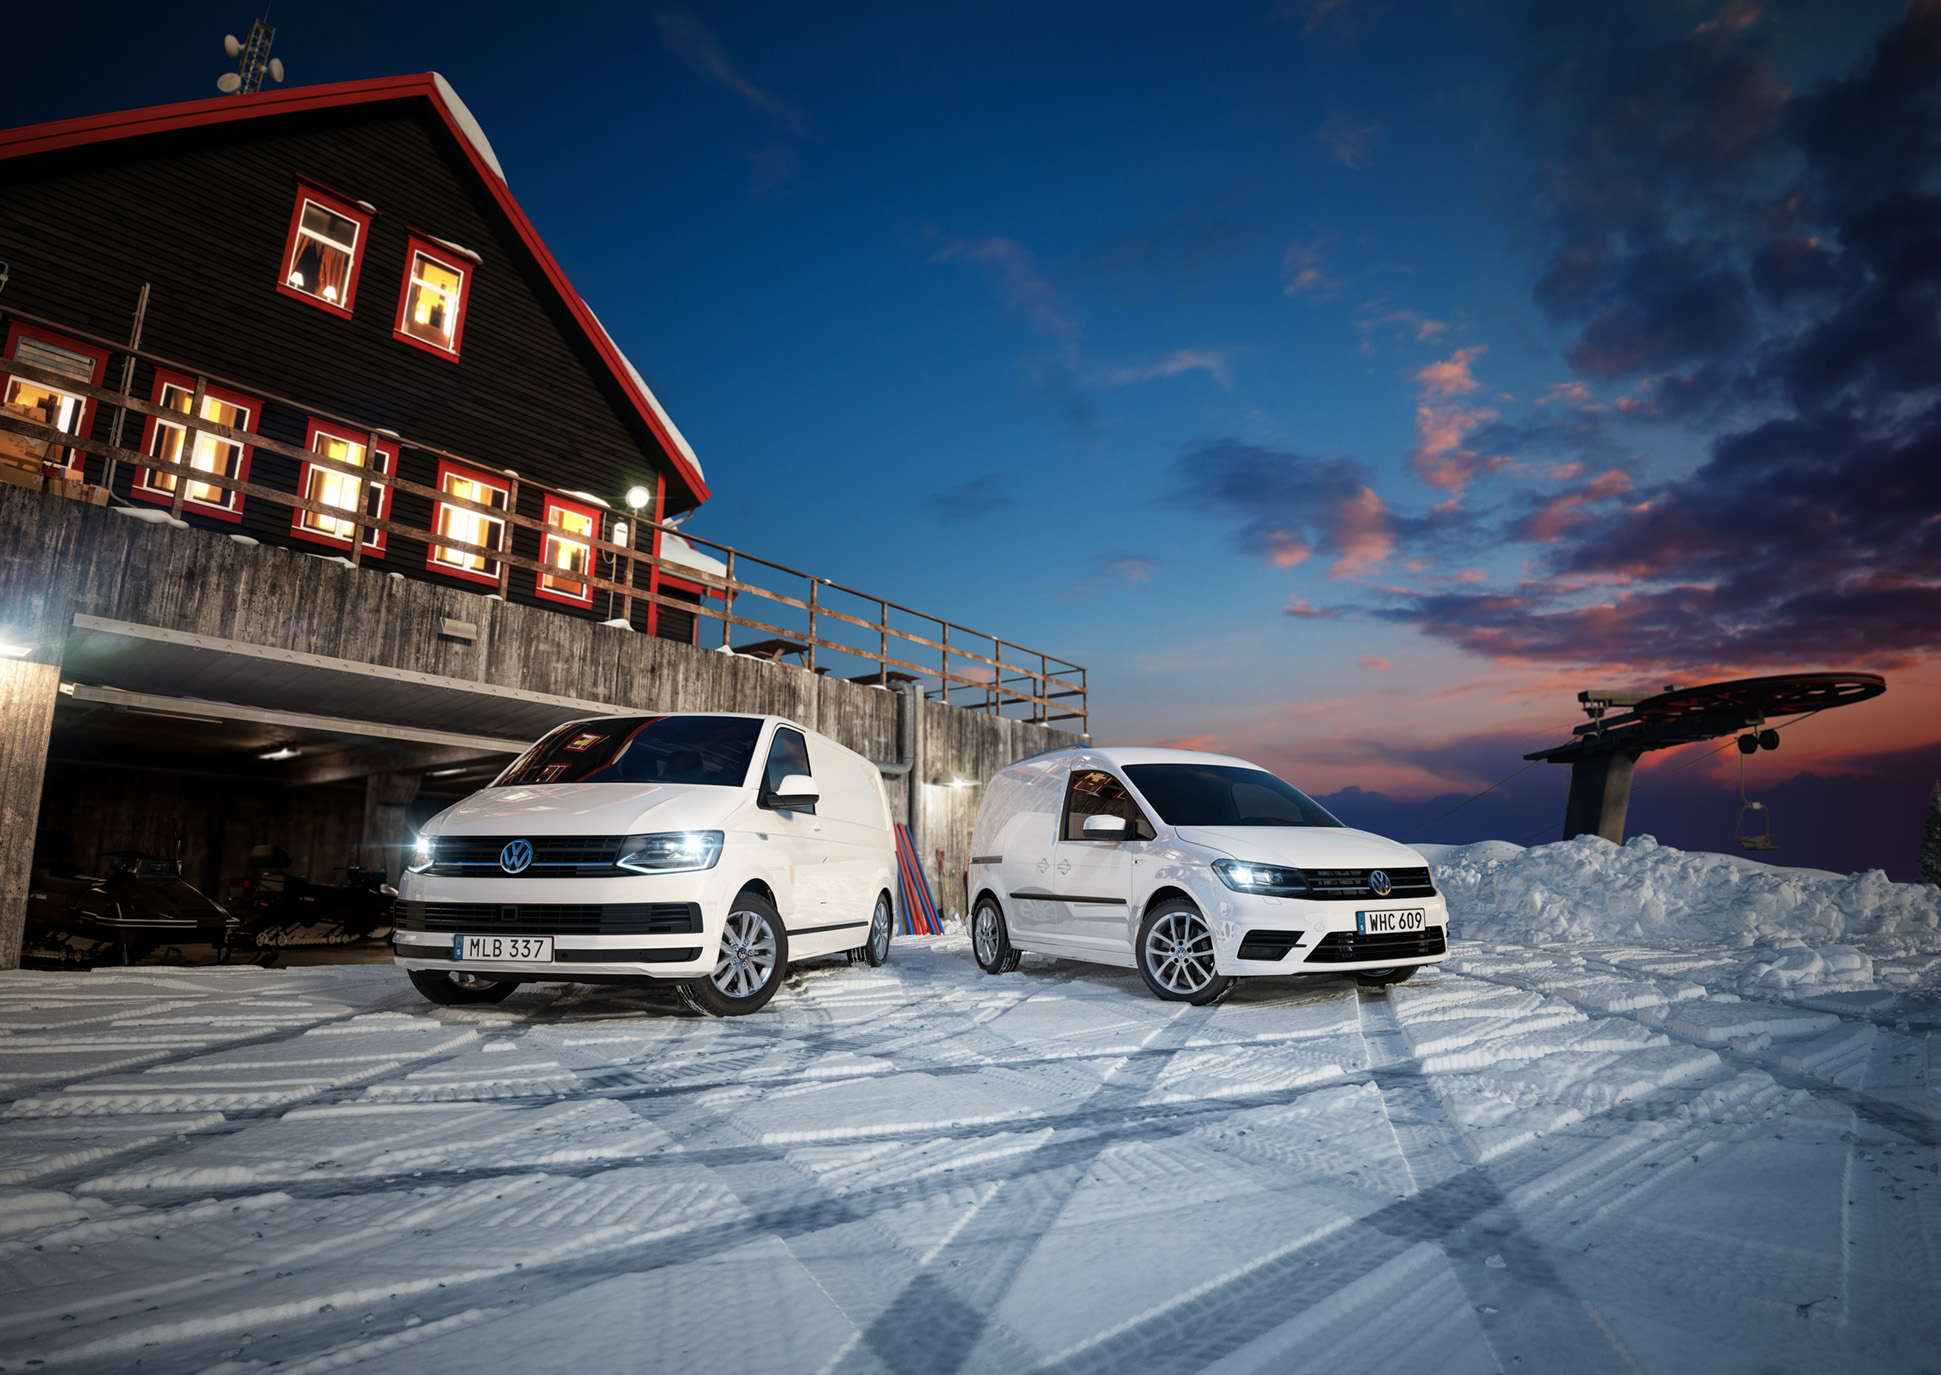 Volkswagen Caddy and Transporter at the top of the snowy mountain, at the topcabin cottage, in the winter night. Amarok, crafter vw, Fjällen vinter snö skidor lift toppstuga